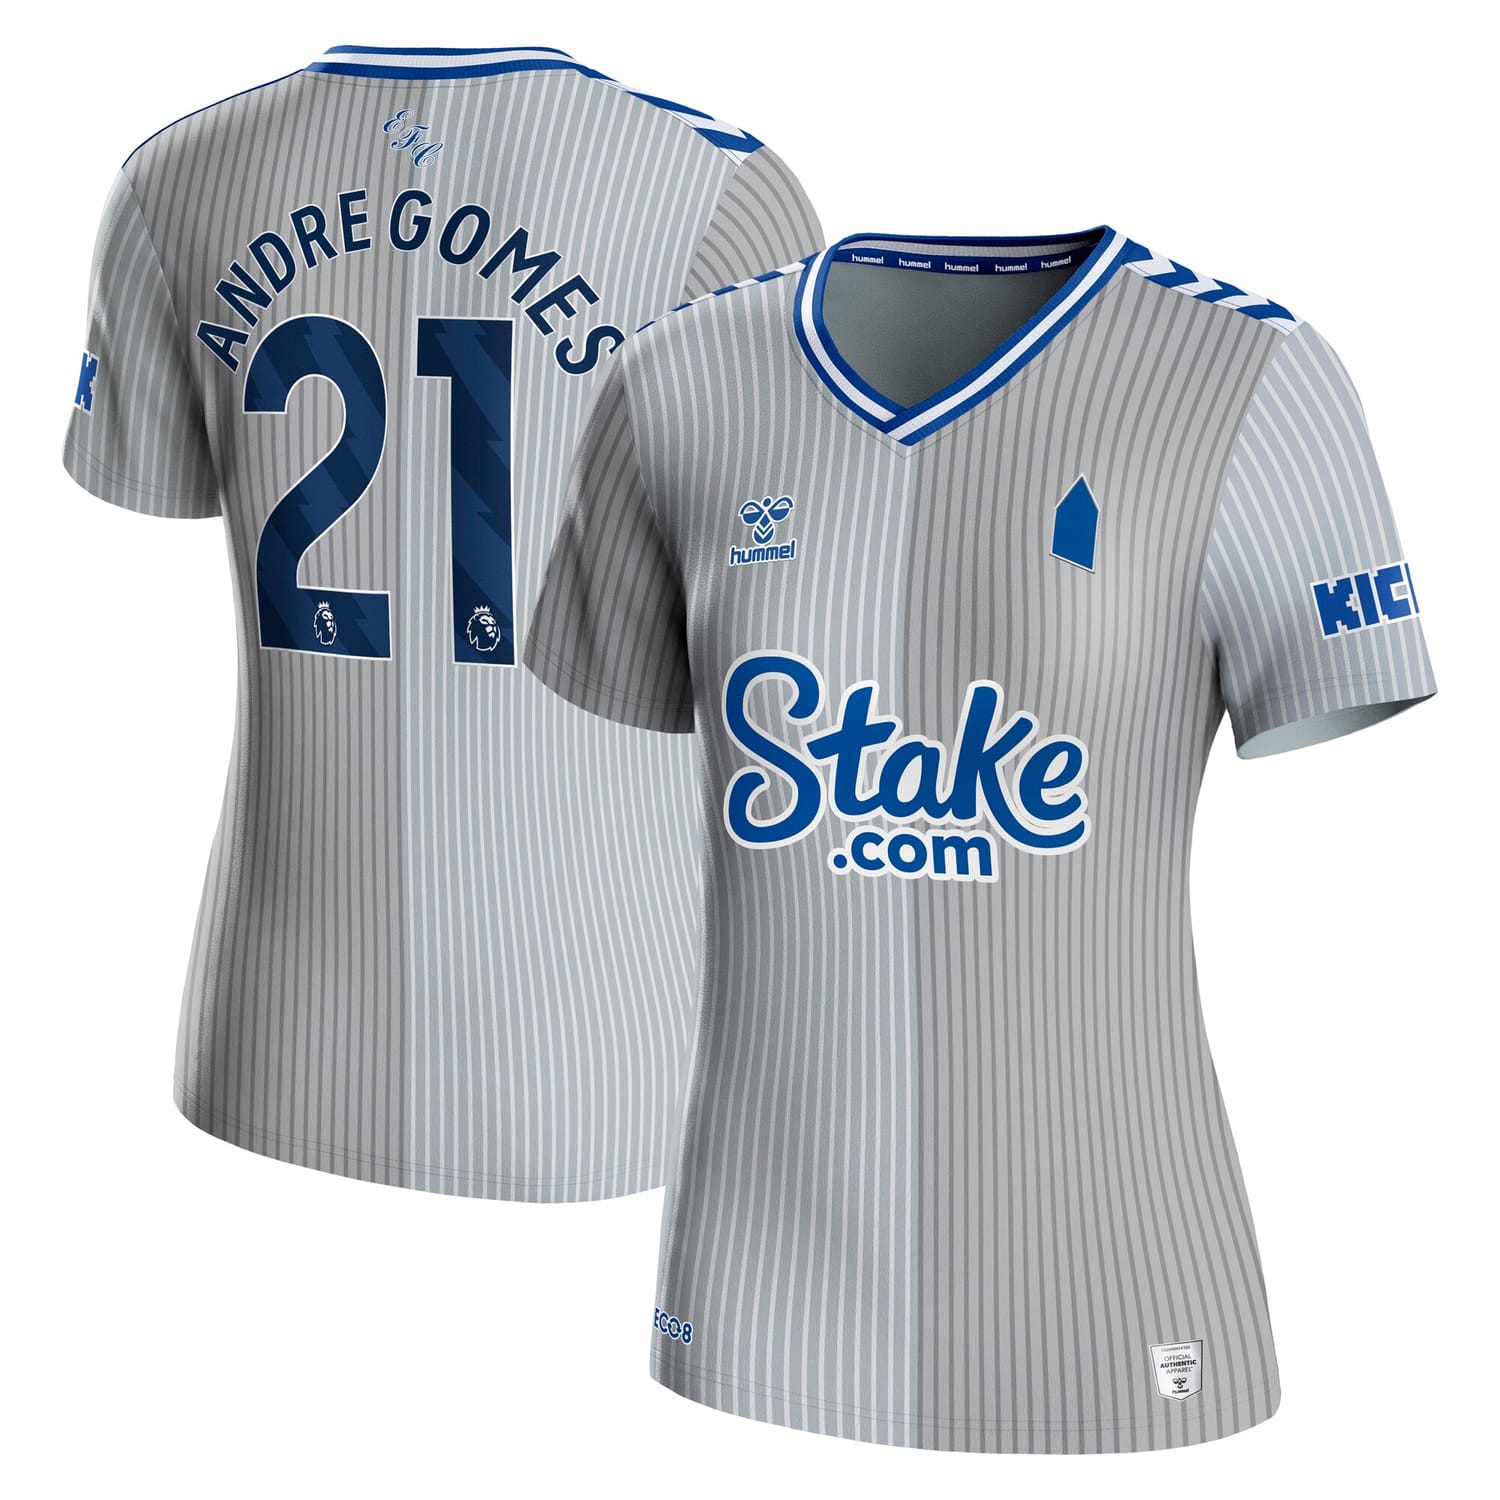 Premier League Everton Third Jersey Shirt 2023-24 player Andre Gomes 21 printing for Women